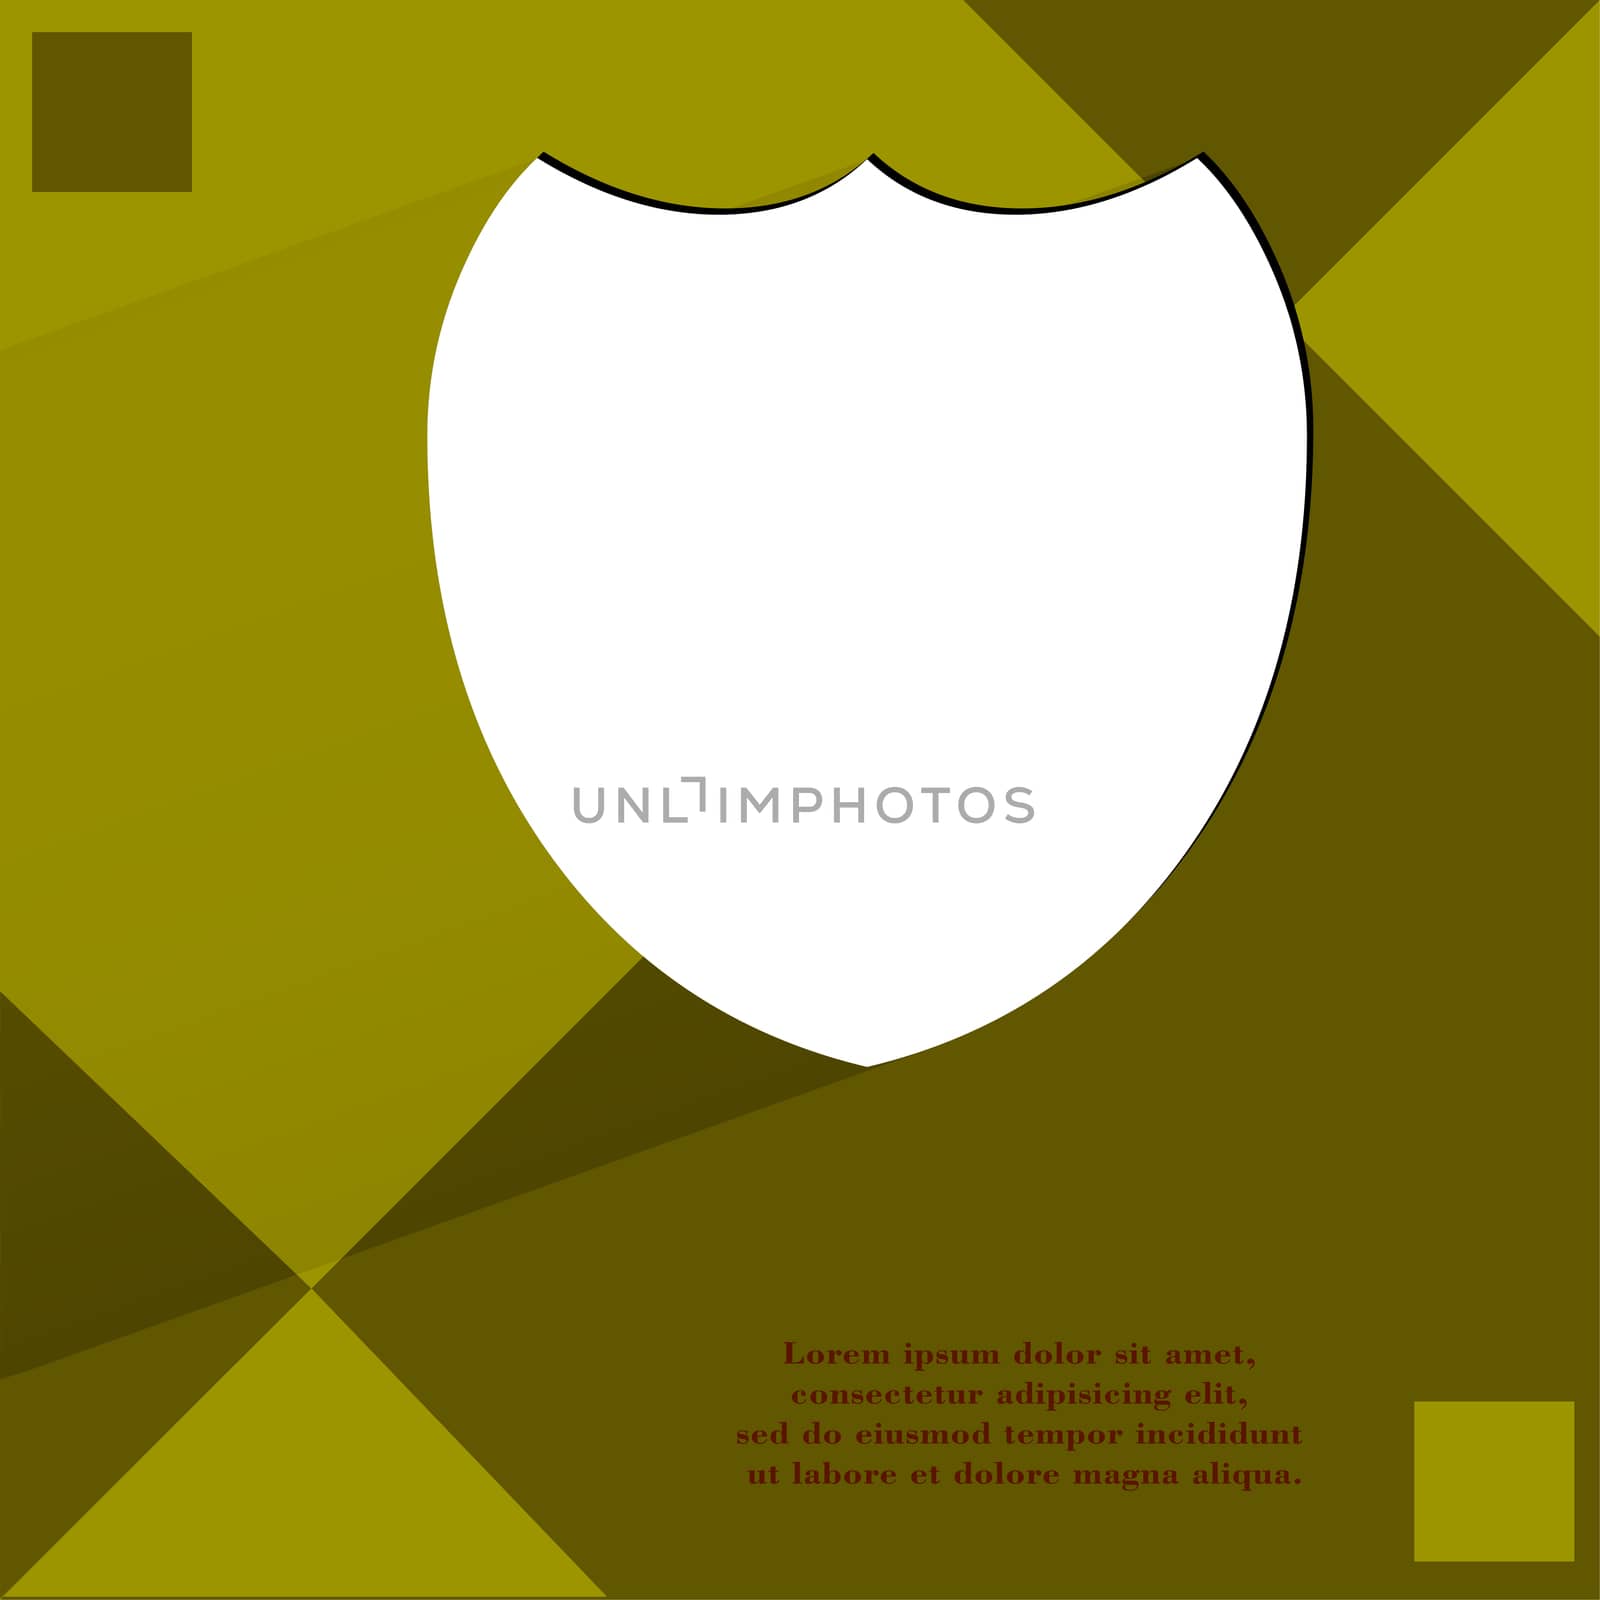 Shield protection. Flat modern web design on a flat geometric abstract background . 